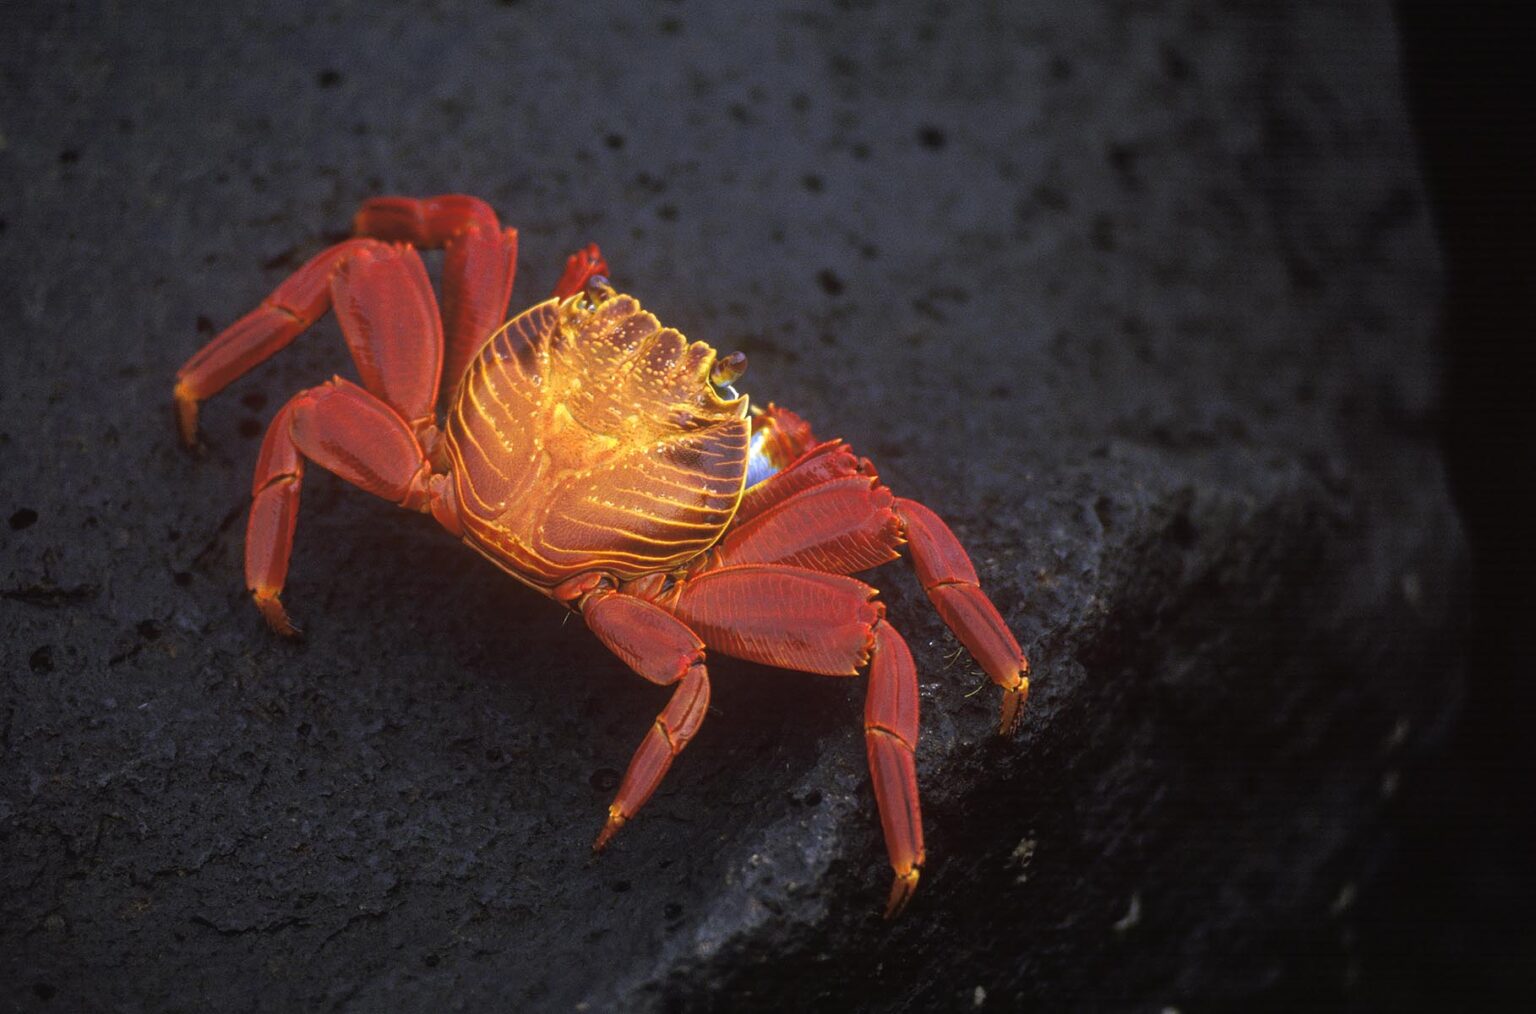 The SALLY LIGHTFOOT CRAB (Grapsus grapsus) is black when young, but turns a brilliant red at maturity - PLAZAS ISLAND, GALAPAGOS ISLANDS, ECUADOR